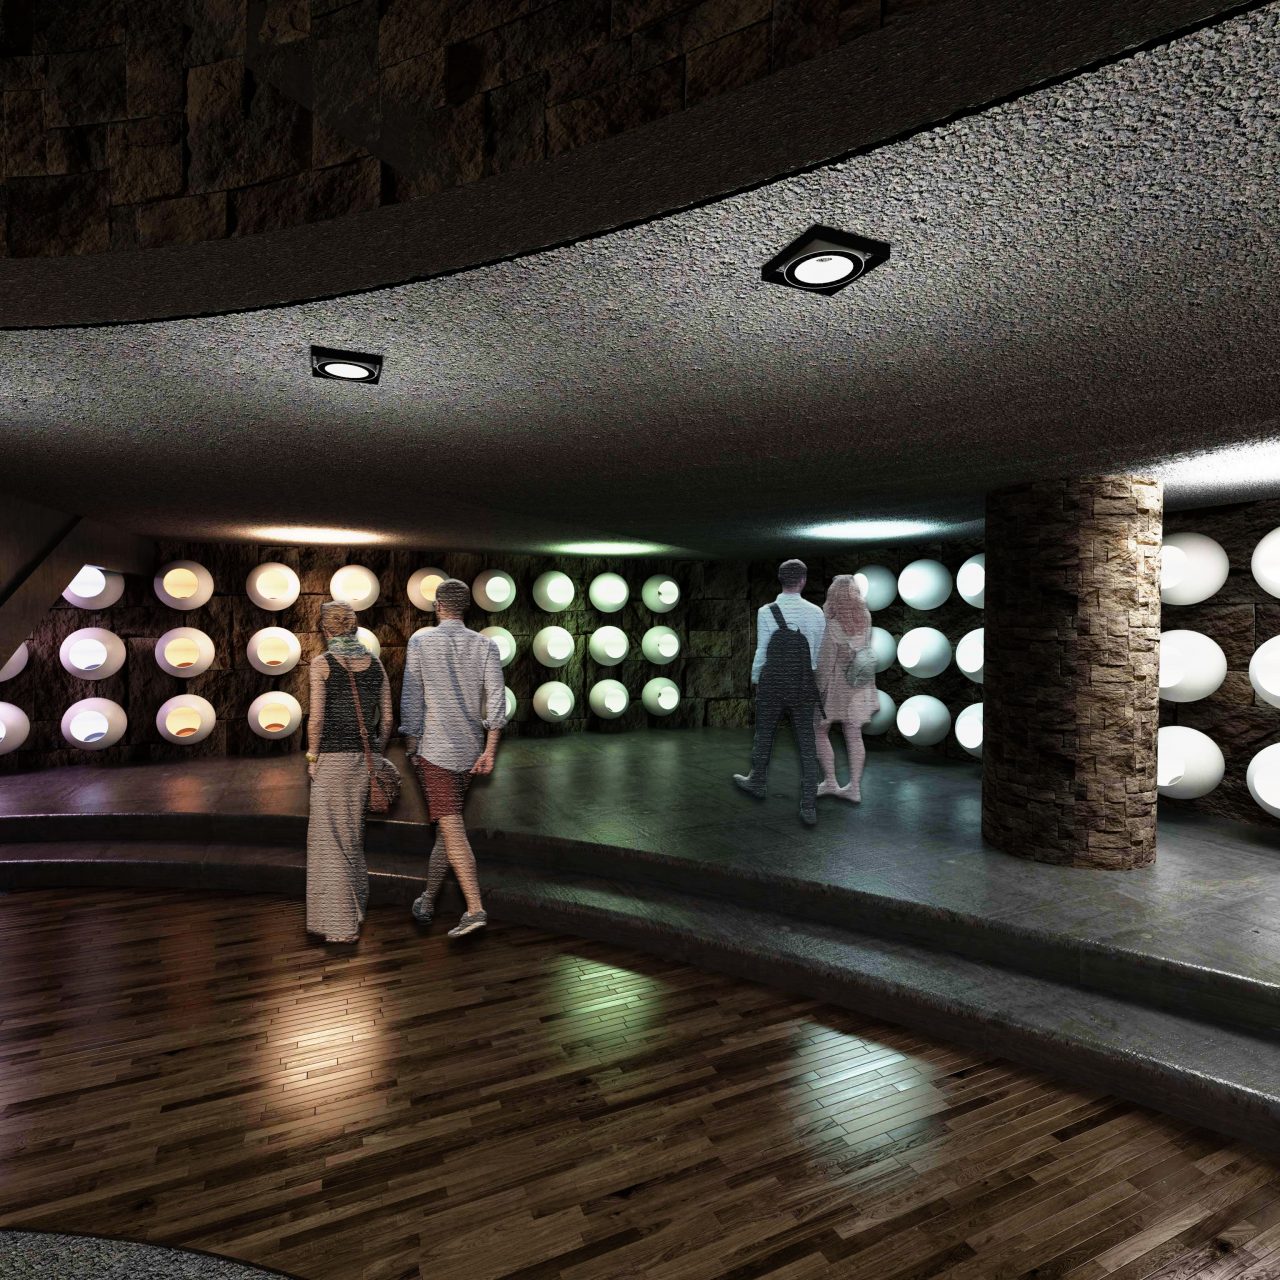 At the entrance, you can see the functional lighting display area. It is educate the color of the light and the temperature can affect the emotion. colors like red, orange and yellow influence people psychologically to feel warm, while blues and greens make individuals feel cool.